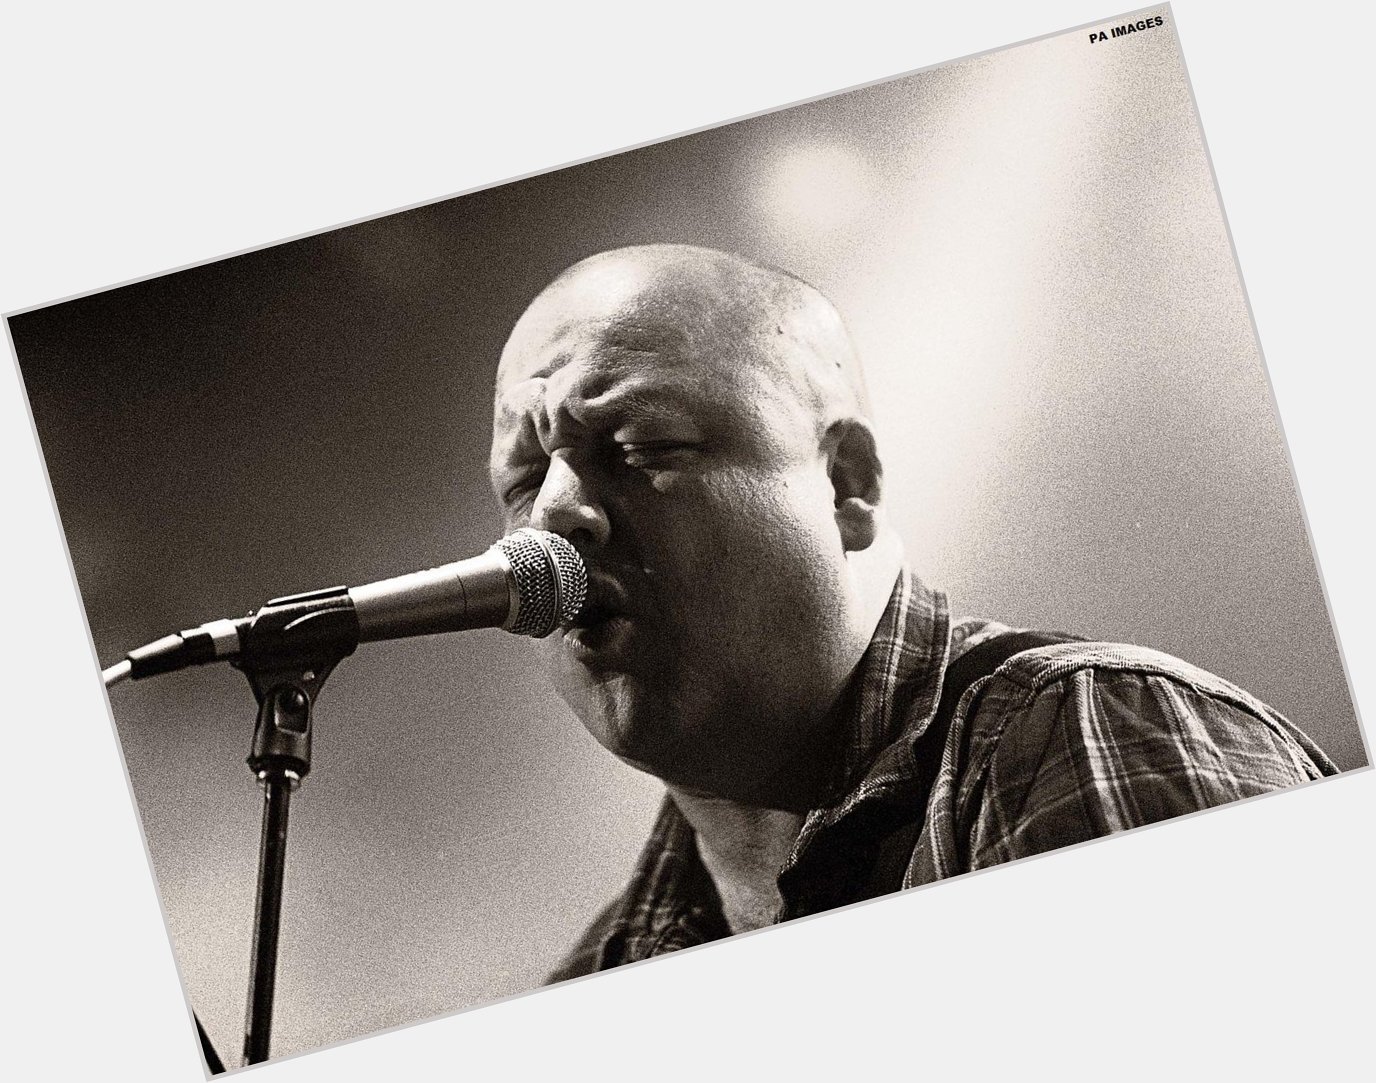 Happy Birthday to Black Francis off of the Pixies! He is 50 today! 